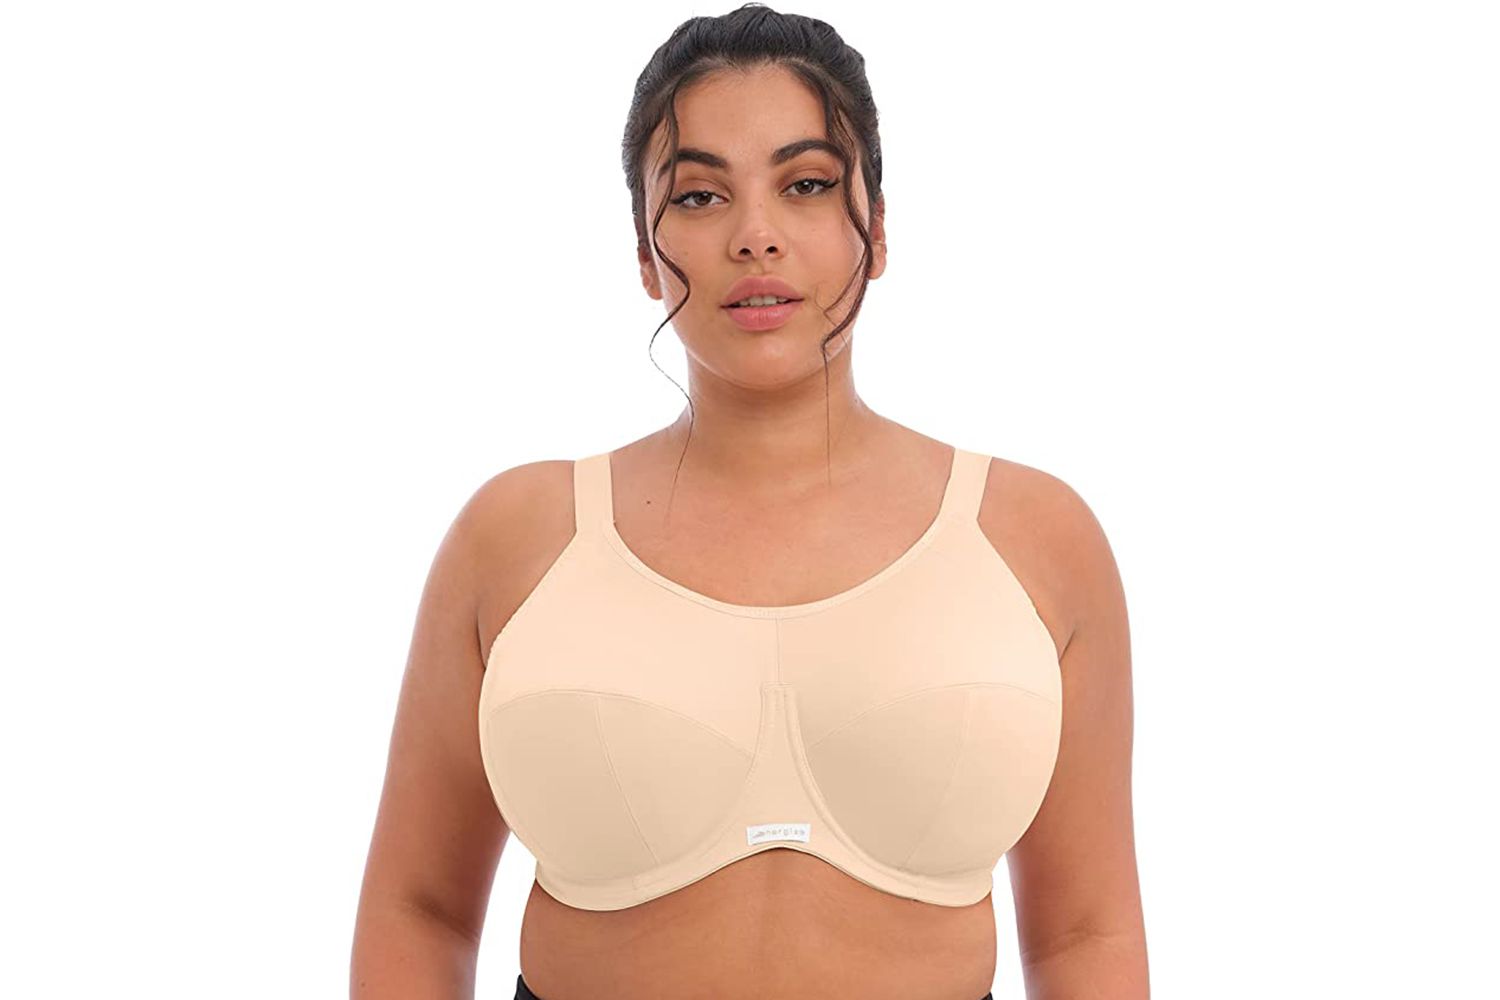 anoj singh recommends Huge Boobs In Sports Bra